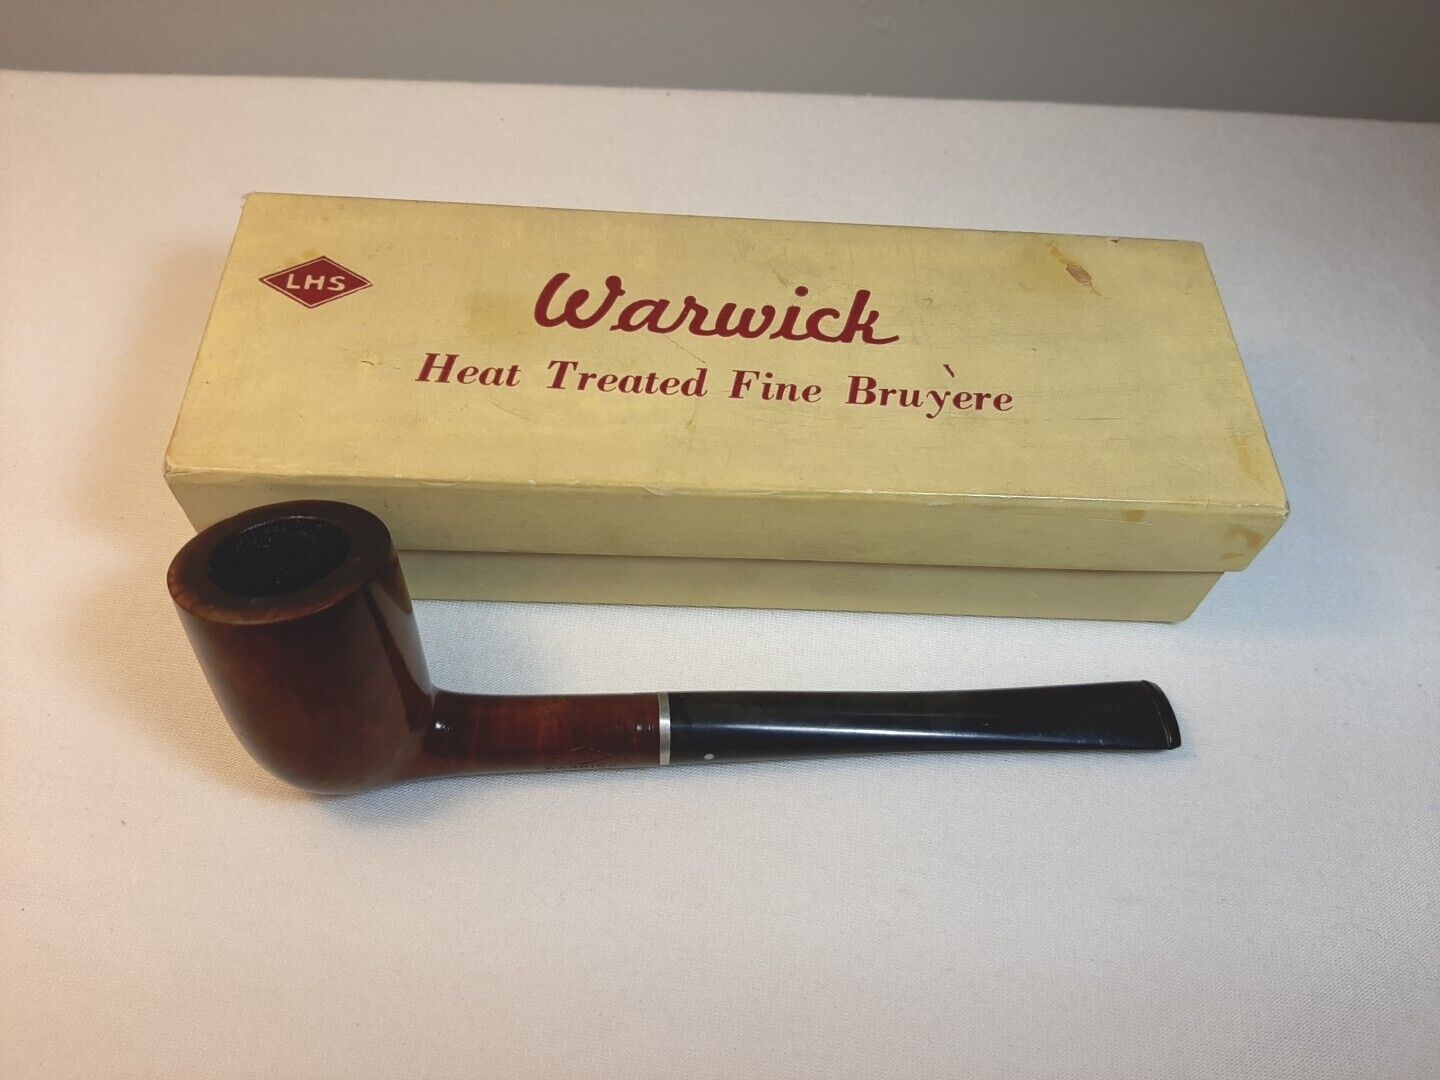 Vintage LHS Warwick Briar Tobacco Smoking Pipe No. 3, Patent Date 1933 with BOX